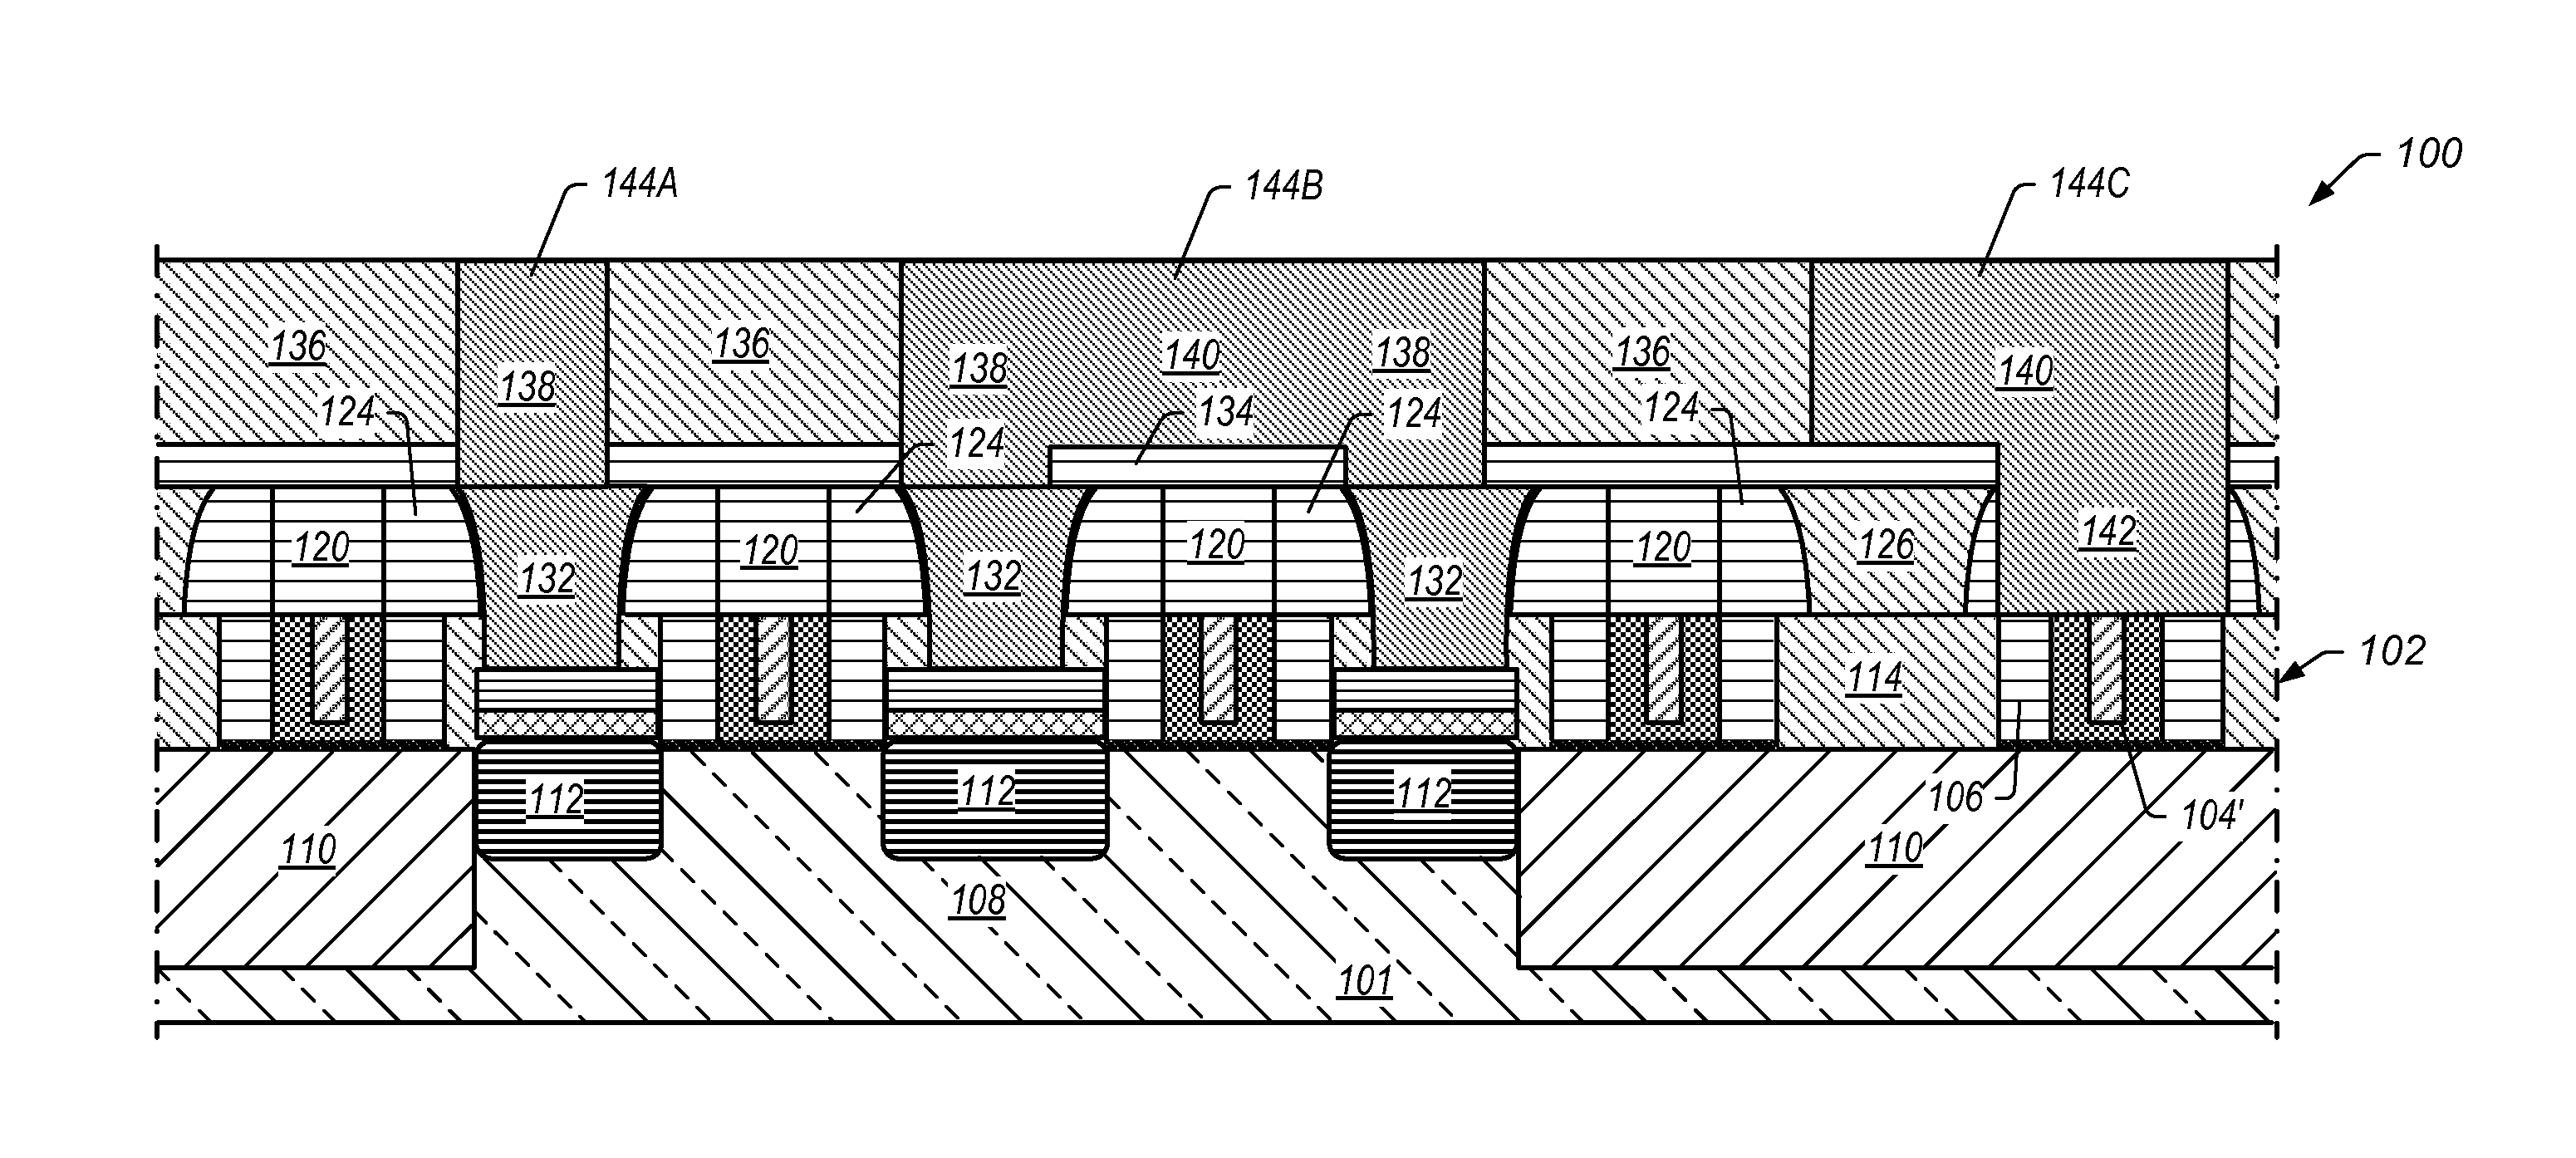 Self-aligned trench contact and local interconnect with replacement gate process